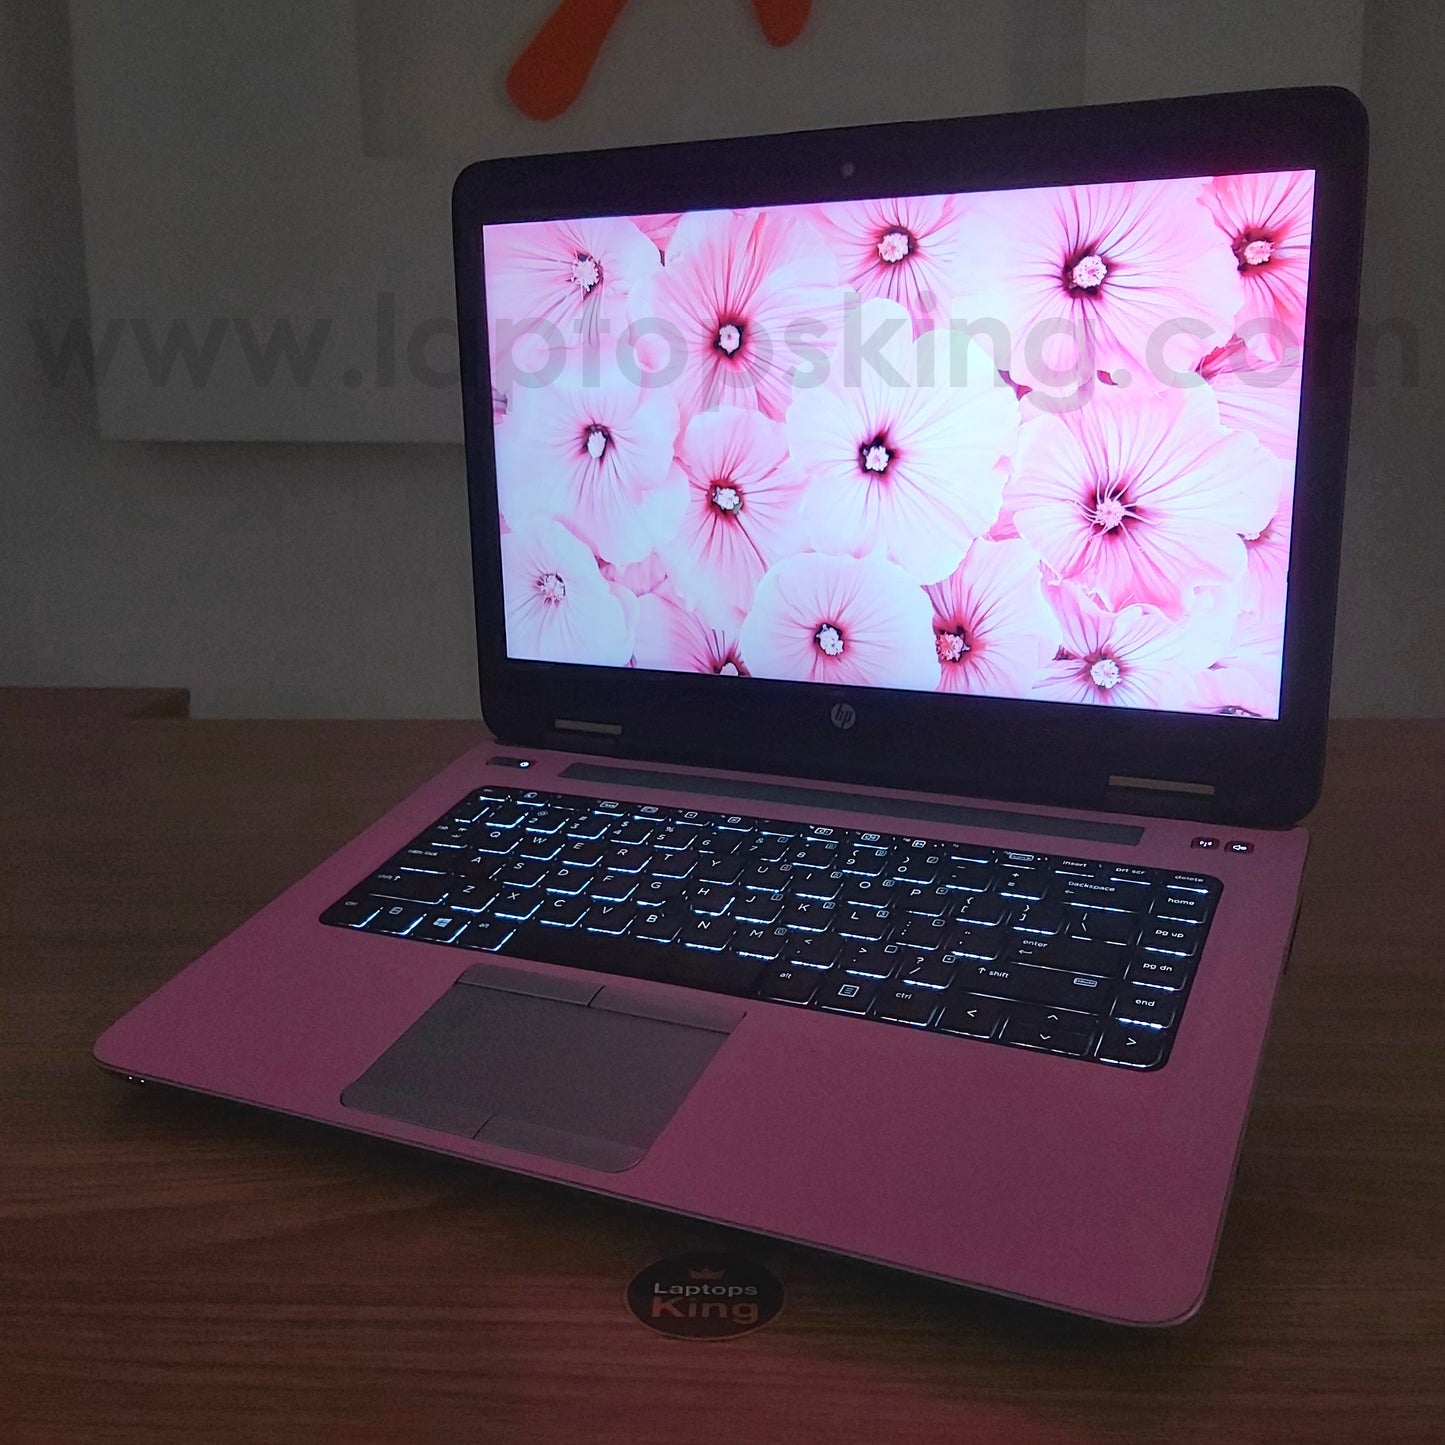 Hp ProBook 640 Core i7 Pink Edition Laptop Offers (Open Box)